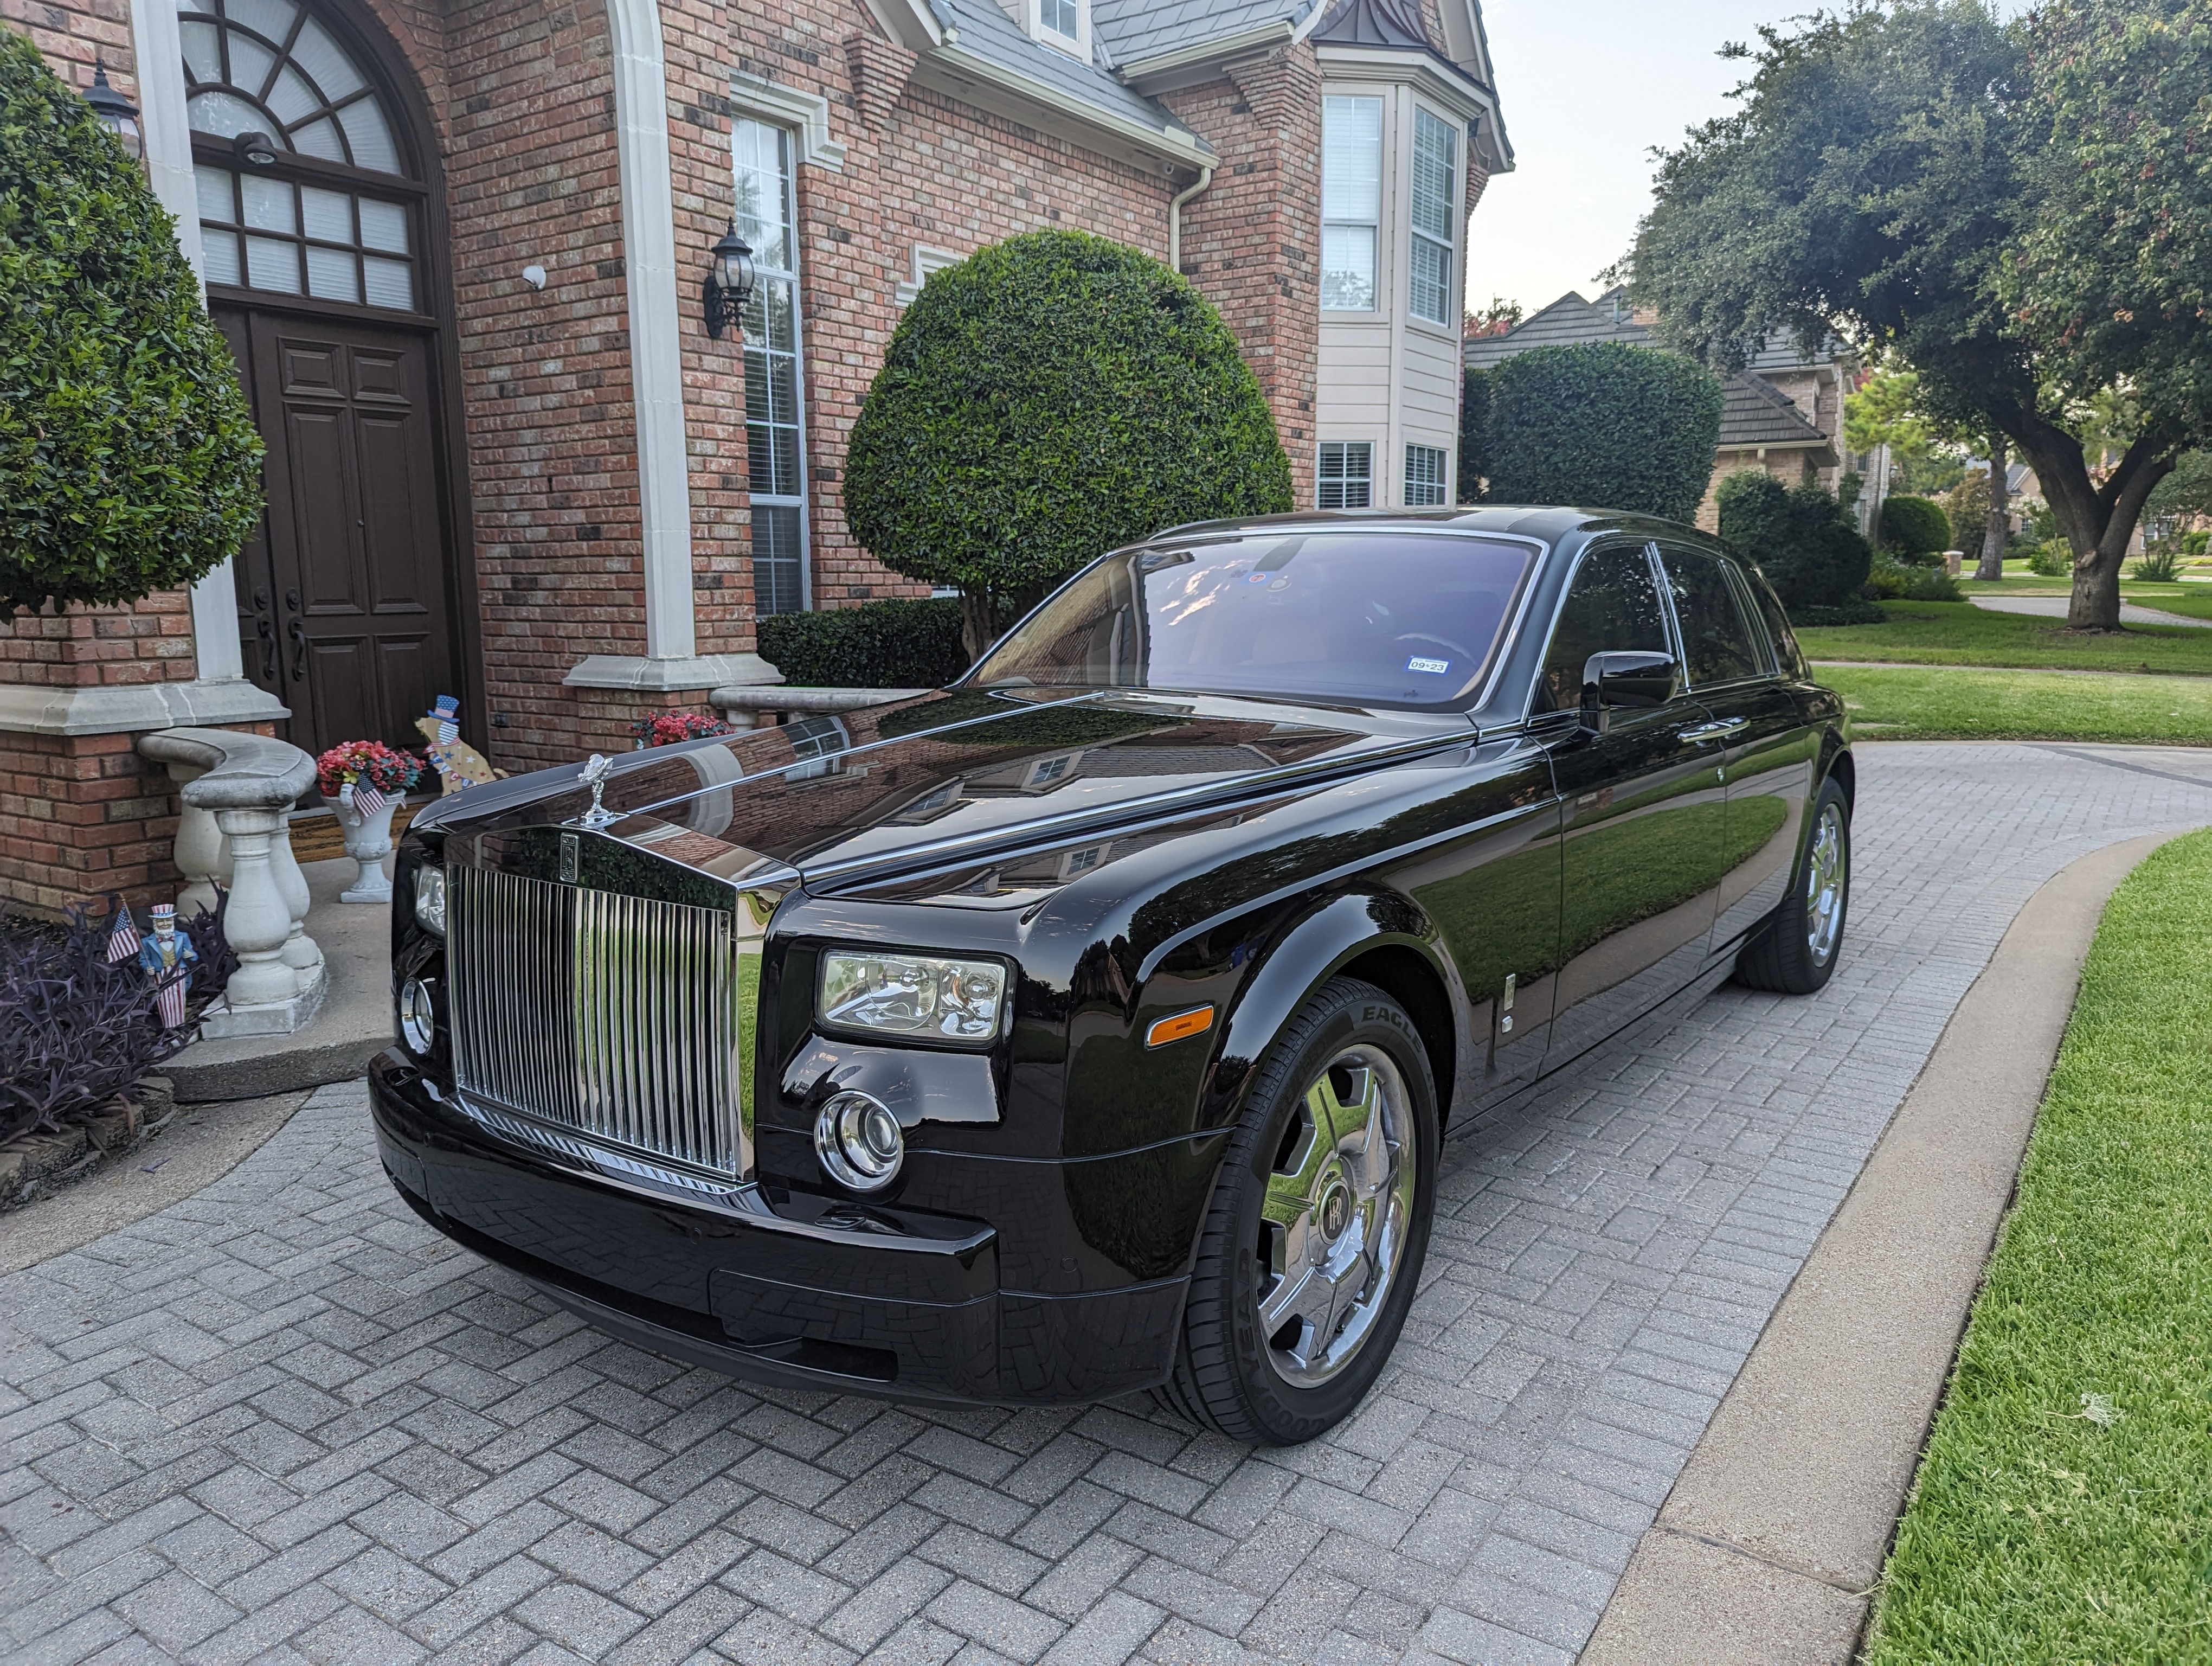 Used 2005 RollsRoyce Phantom For Sale 109995  Private Collection  Motors Inc Stock B6427